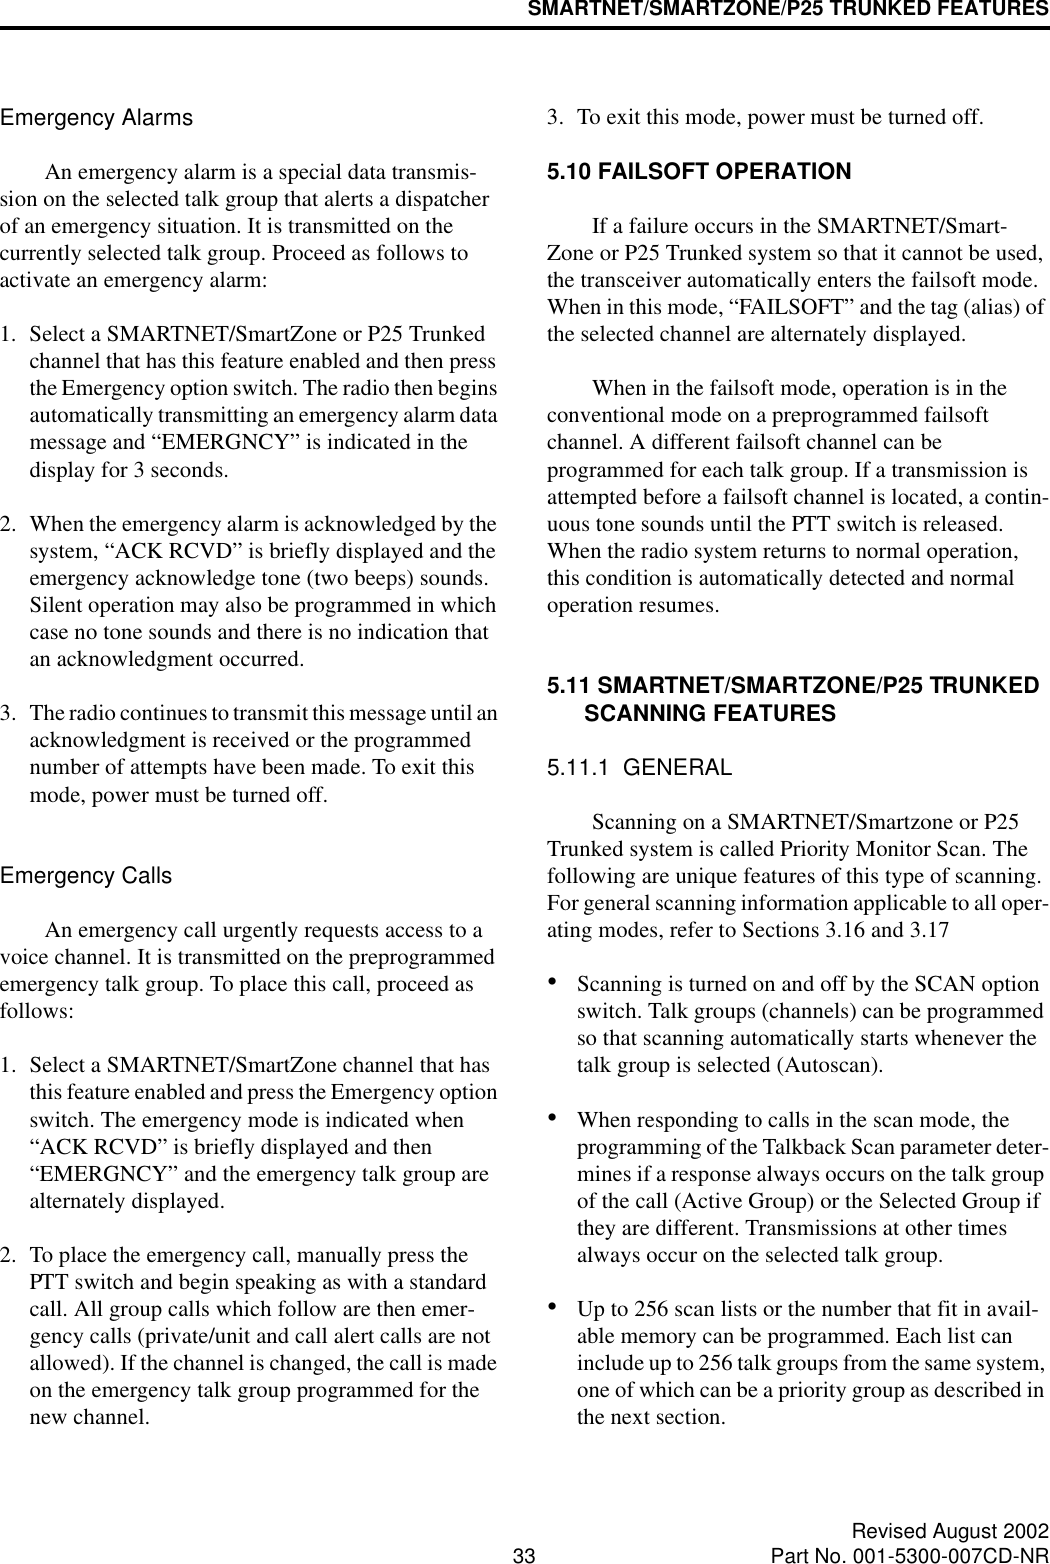 SMARTNET/SMARTZONE/P25 TRUNKED FEATURES33 Revised August 2002Part No. 001-5300-007CD-NREmergency AlarmsAn emergency alarm is a special data transmis-sion on the selected talk group that alerts a dispatcher of an emergency situation. It is transmitted on the currently selected talk group. Proceed as follows to activate an emergency alarm: 1. Select a SMARTNET/SmartZone or P25 Trunked channel that has this feature enabled and then press the Emergency option switch. The radio then begins automatically transmitting an emergency alarm data message and “EMERGNCY” is indicated in the display for 3 seconds.2. When the emergency alarm is acknowledged by the system, “ACK RCVD” is briefly displayed and the emergency acknowledge tone (two beeps) sounds. Silent operation may also be programmed in which case no tone sounds and there is no indication that an acknowledgment occurred.3. The radio continues to transmit this message until an acknowledgment is received or the programmed number of attempts have been made. To exit this mode, power must be turned off. Emergency CallsAn emergency call urgently requests access to a voice channel. It is transmitted on the preprogrammed emergency talk group. To place this call, proceed as follows: 1. Select a SMARTNET/SmartZone channel that has this feature enabled and press the Emergency option switch. The emergency mode is indicated when “ACK RCVD” is briefly displayed and then “EMERGNCY” and the emergency talk group are alternately displayed. 2. To place the emergency call, manually press the PTT switch and begin speaking as with a standard call. All group calls which follow are then emer-gency calls (private/unit and call alert calls are not allowed). If the channel is changed, the call is made on the emergency talk group programmed for the new channel.3. To exit this mode, power must be turned off.5.10 FAILSOFT OPERATIONIf a failure occurs in the SMARTNET/Smart-Zone or P25 Trunked system so that it cannot be used, the transceiver automatically enters the failsoft mode. When in this mode, “FAILSOFT” and the tag (alias) of the selected channel are alternately displayed.When in the failsoft mode, operation is in the conventional mode on a preprogrammed failsoft channel. A different failsoft channel can be programmed for each talk group. If a transmission is attempted before a failsoft channel is located, a contin-uous tone sounds until the PTT switch is released. When the radio system returns to normal operation, this condition is automatically detected and normal operation resumes. 5.11 SMARTNET/SMARTZONE/P25 TRUNKED SCANNING FEATURES5.11.1  GENERALScanning on a SMARTNET/Smartzone or P25 Trunked system is called Priority Monitor Scan. The following are unique features of this type of scanning. For general scanning information applicable to all oper-ating modes, refer to Sections 3.16 and 3.17•Scanning is turned on and off by the SCAN option switch. Talk groups (channels) can be programmed so that scanning automatically starts whenever the talk group is selected (Autoscan). •When responding to calls in the scan mode, the programming of the Talkback Scan parameter deter-mines if a response always occurs on the talk group of the call (Active Group) or the Selected Group if they are different. Transmissions at other times always occur on the selected talk group.•Up to 256 scan lists or the number that fit in avail-able memory can be programmed. Each list can include up to 256 talk groups from the same system, one of which can be a priority group as described in the next section. 